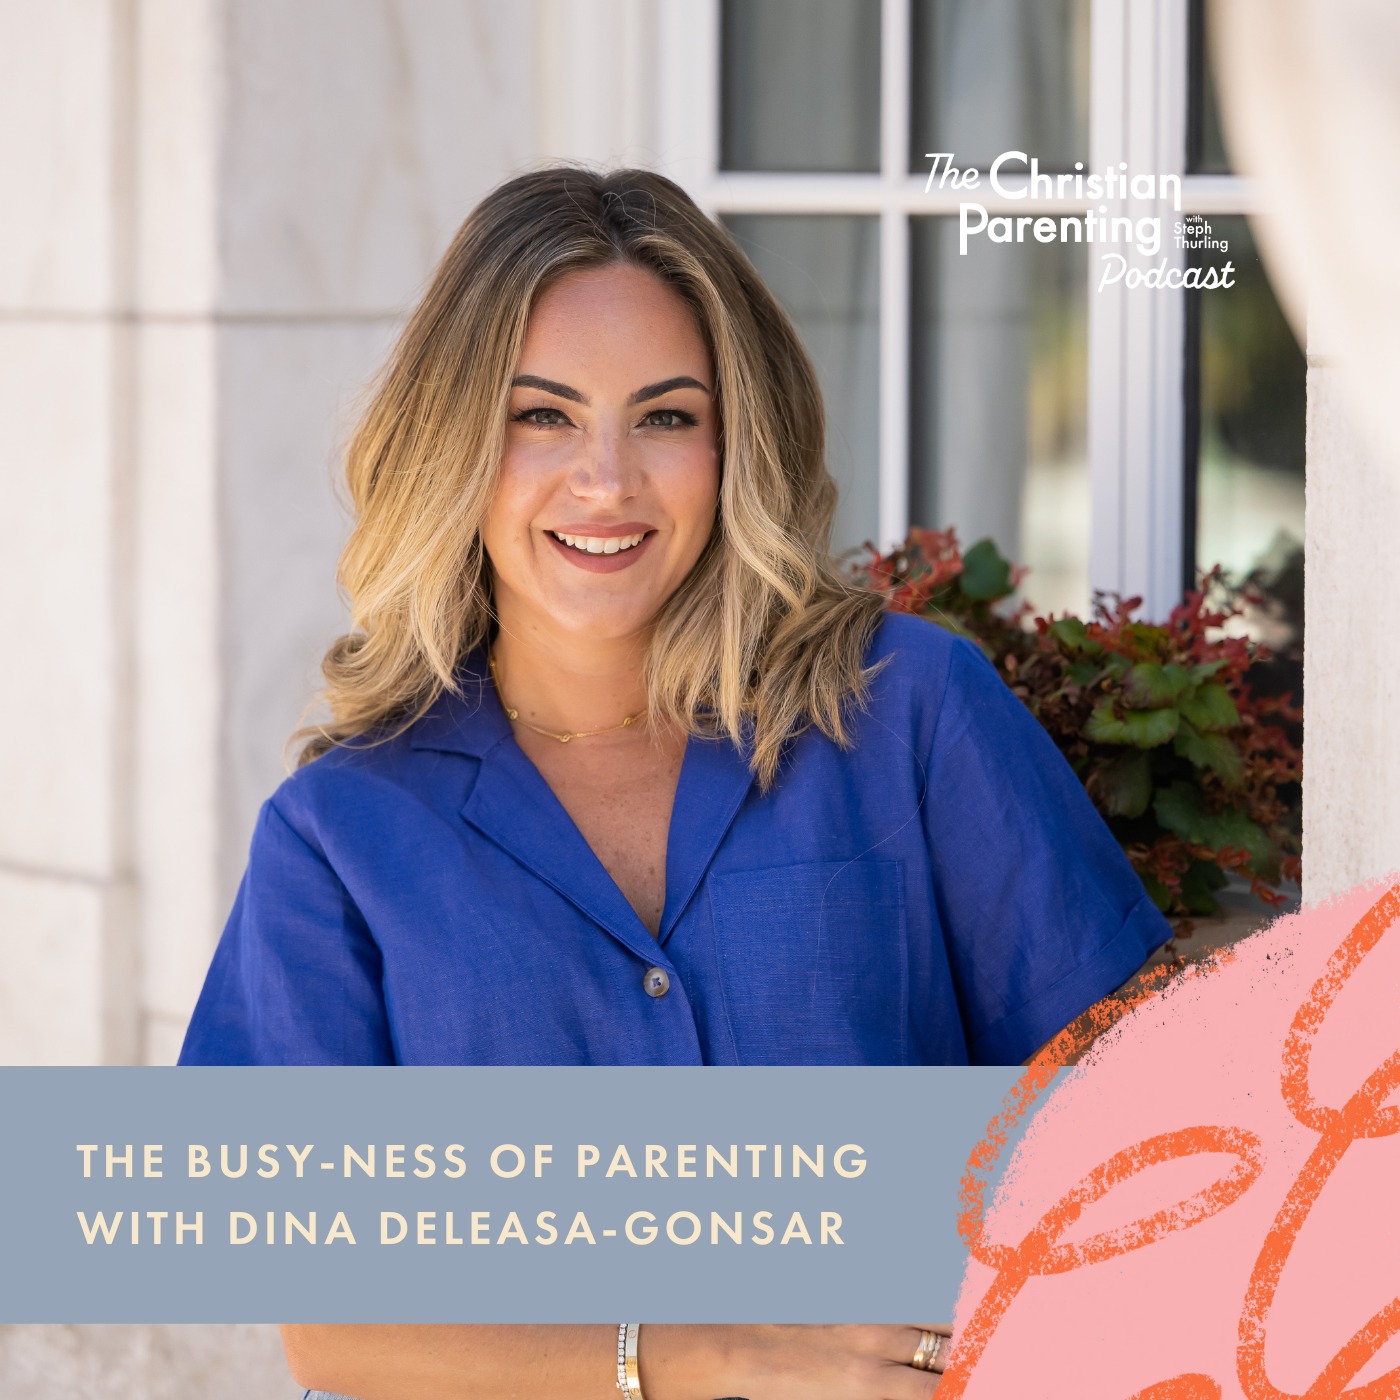 The busy-ness of parenting with Dina Deleasa-Gonsar